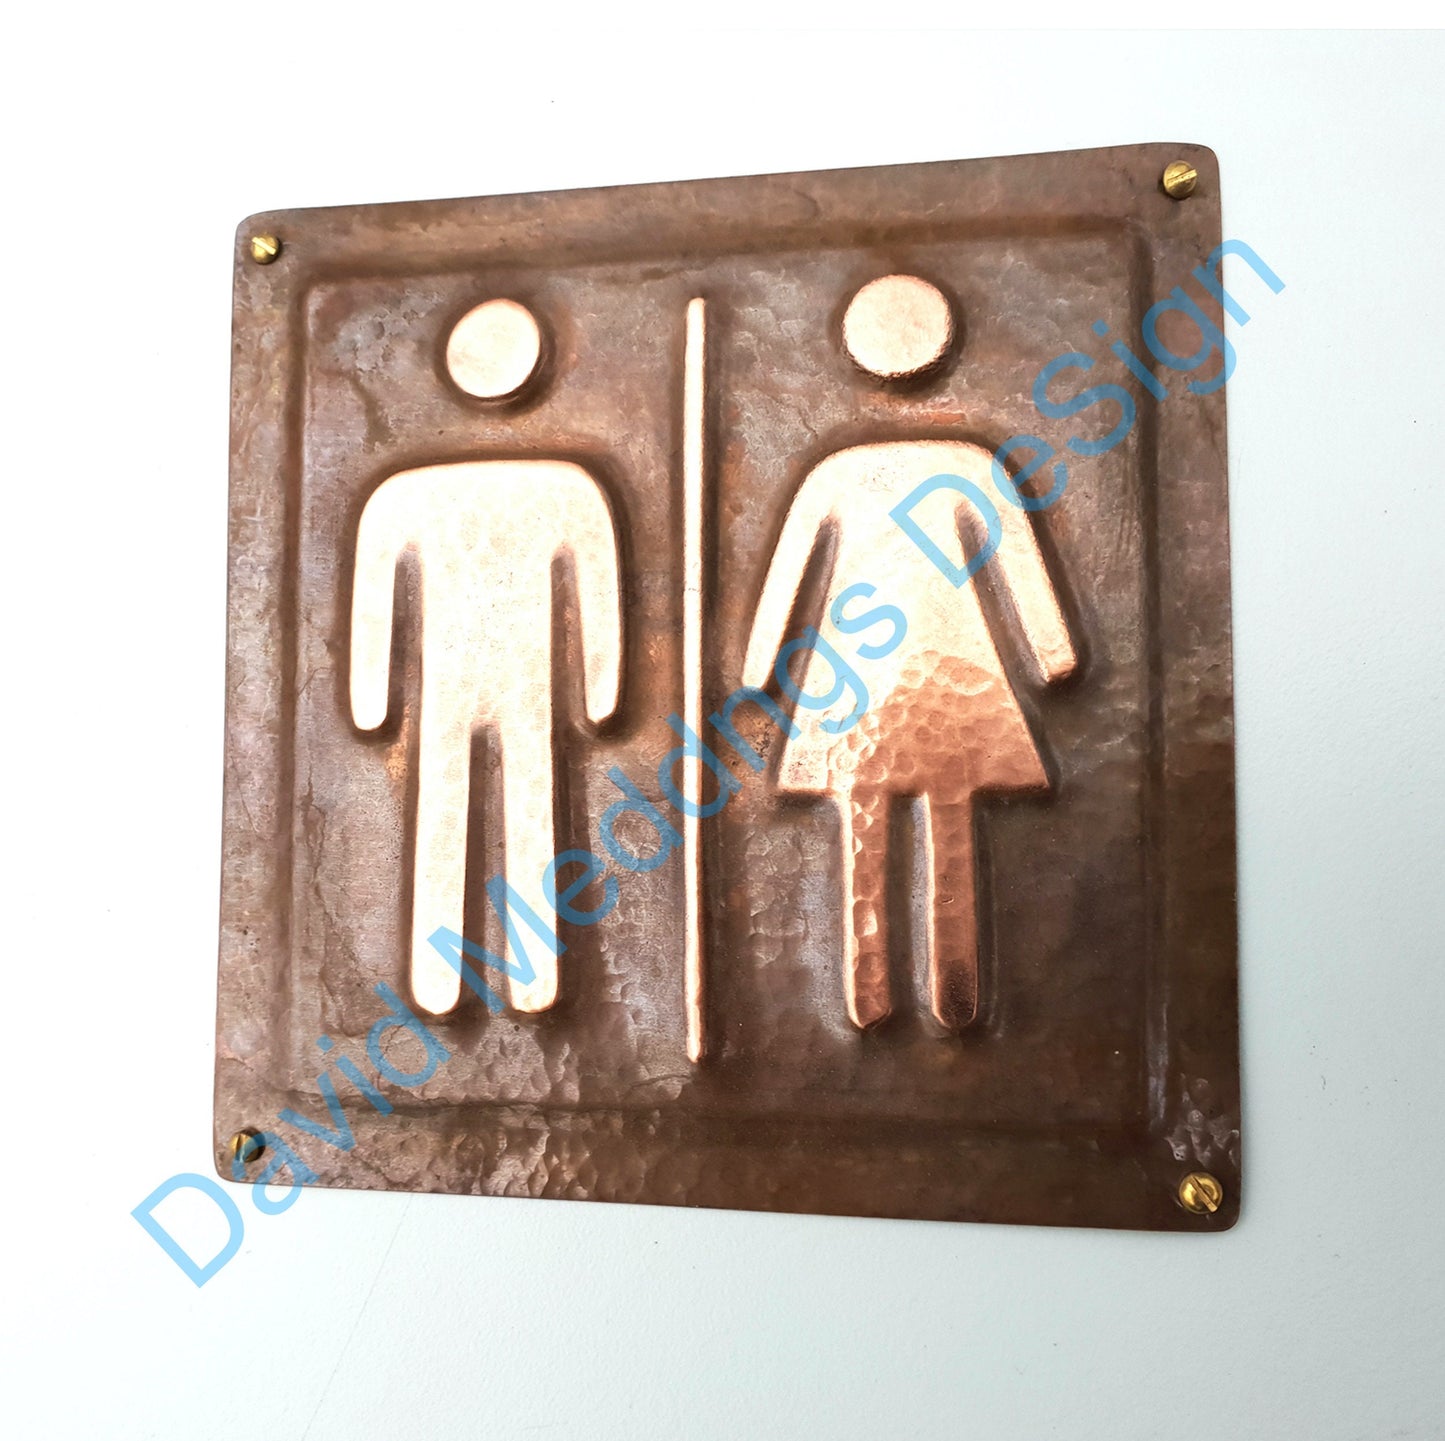 Copper Baby changing and Wheelchair user disabled toilet lavatory sign 4.2"/105mm high in patinated or hammered finish tx